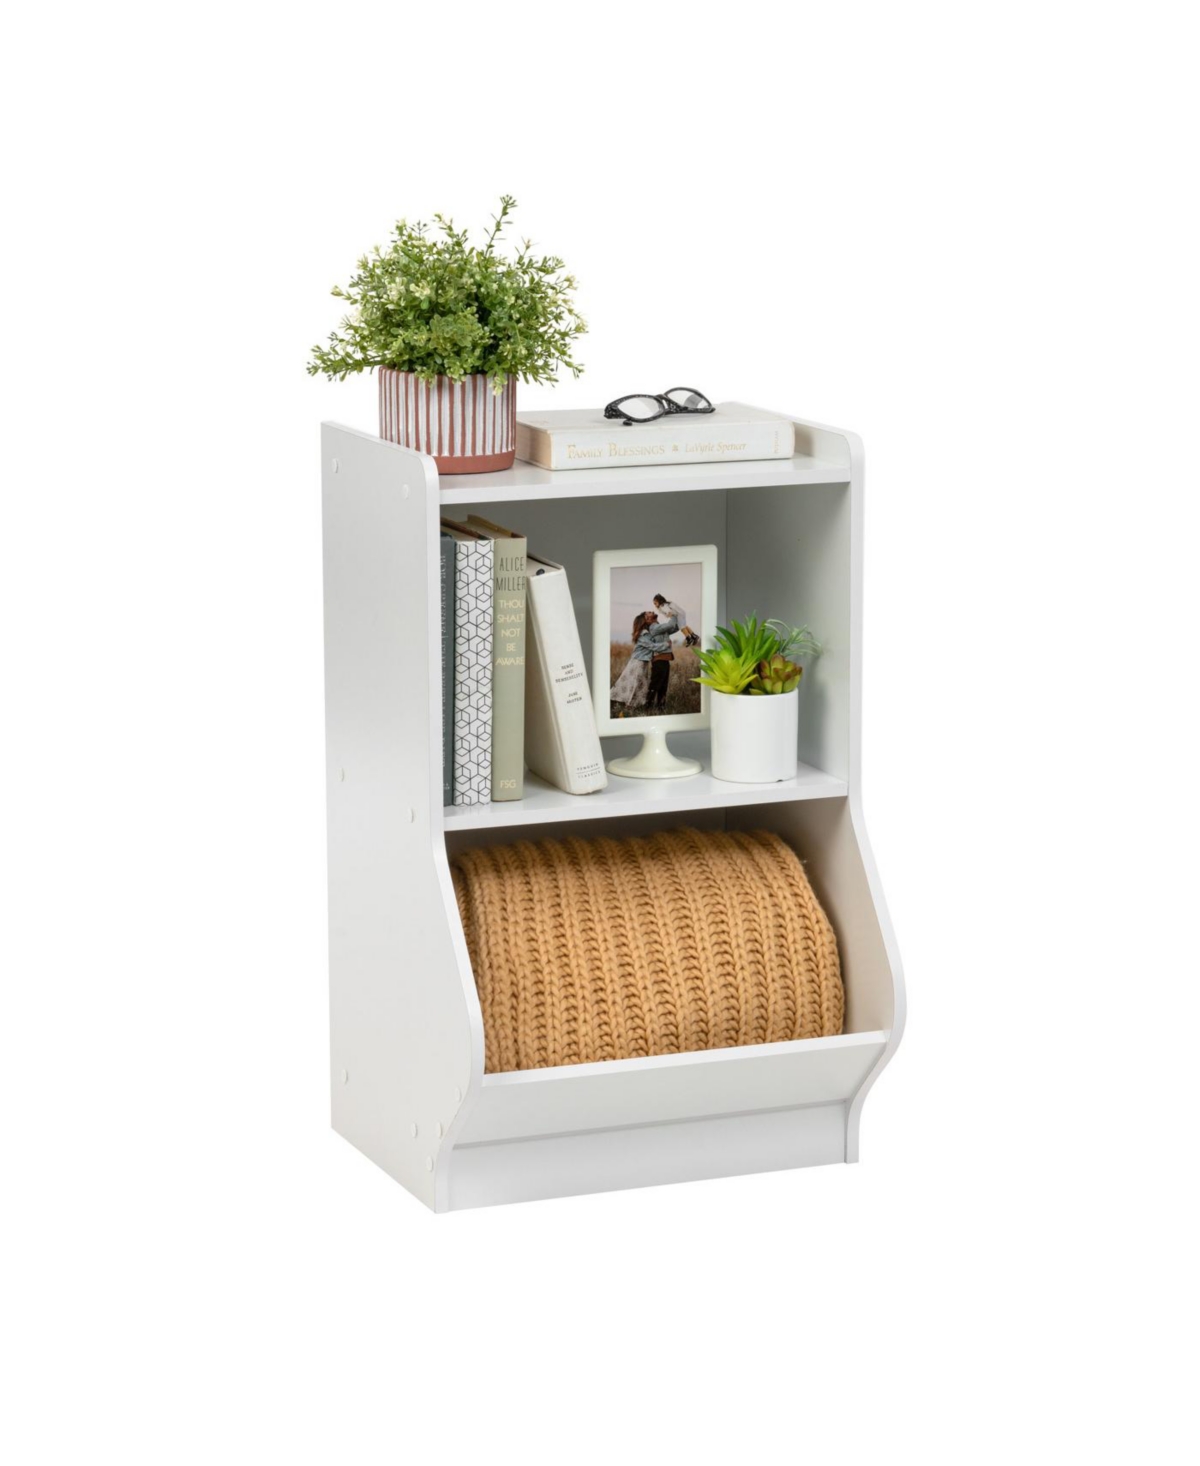 2-Tier Shelf Organizer with Easy Access Angled Cubby, White - White